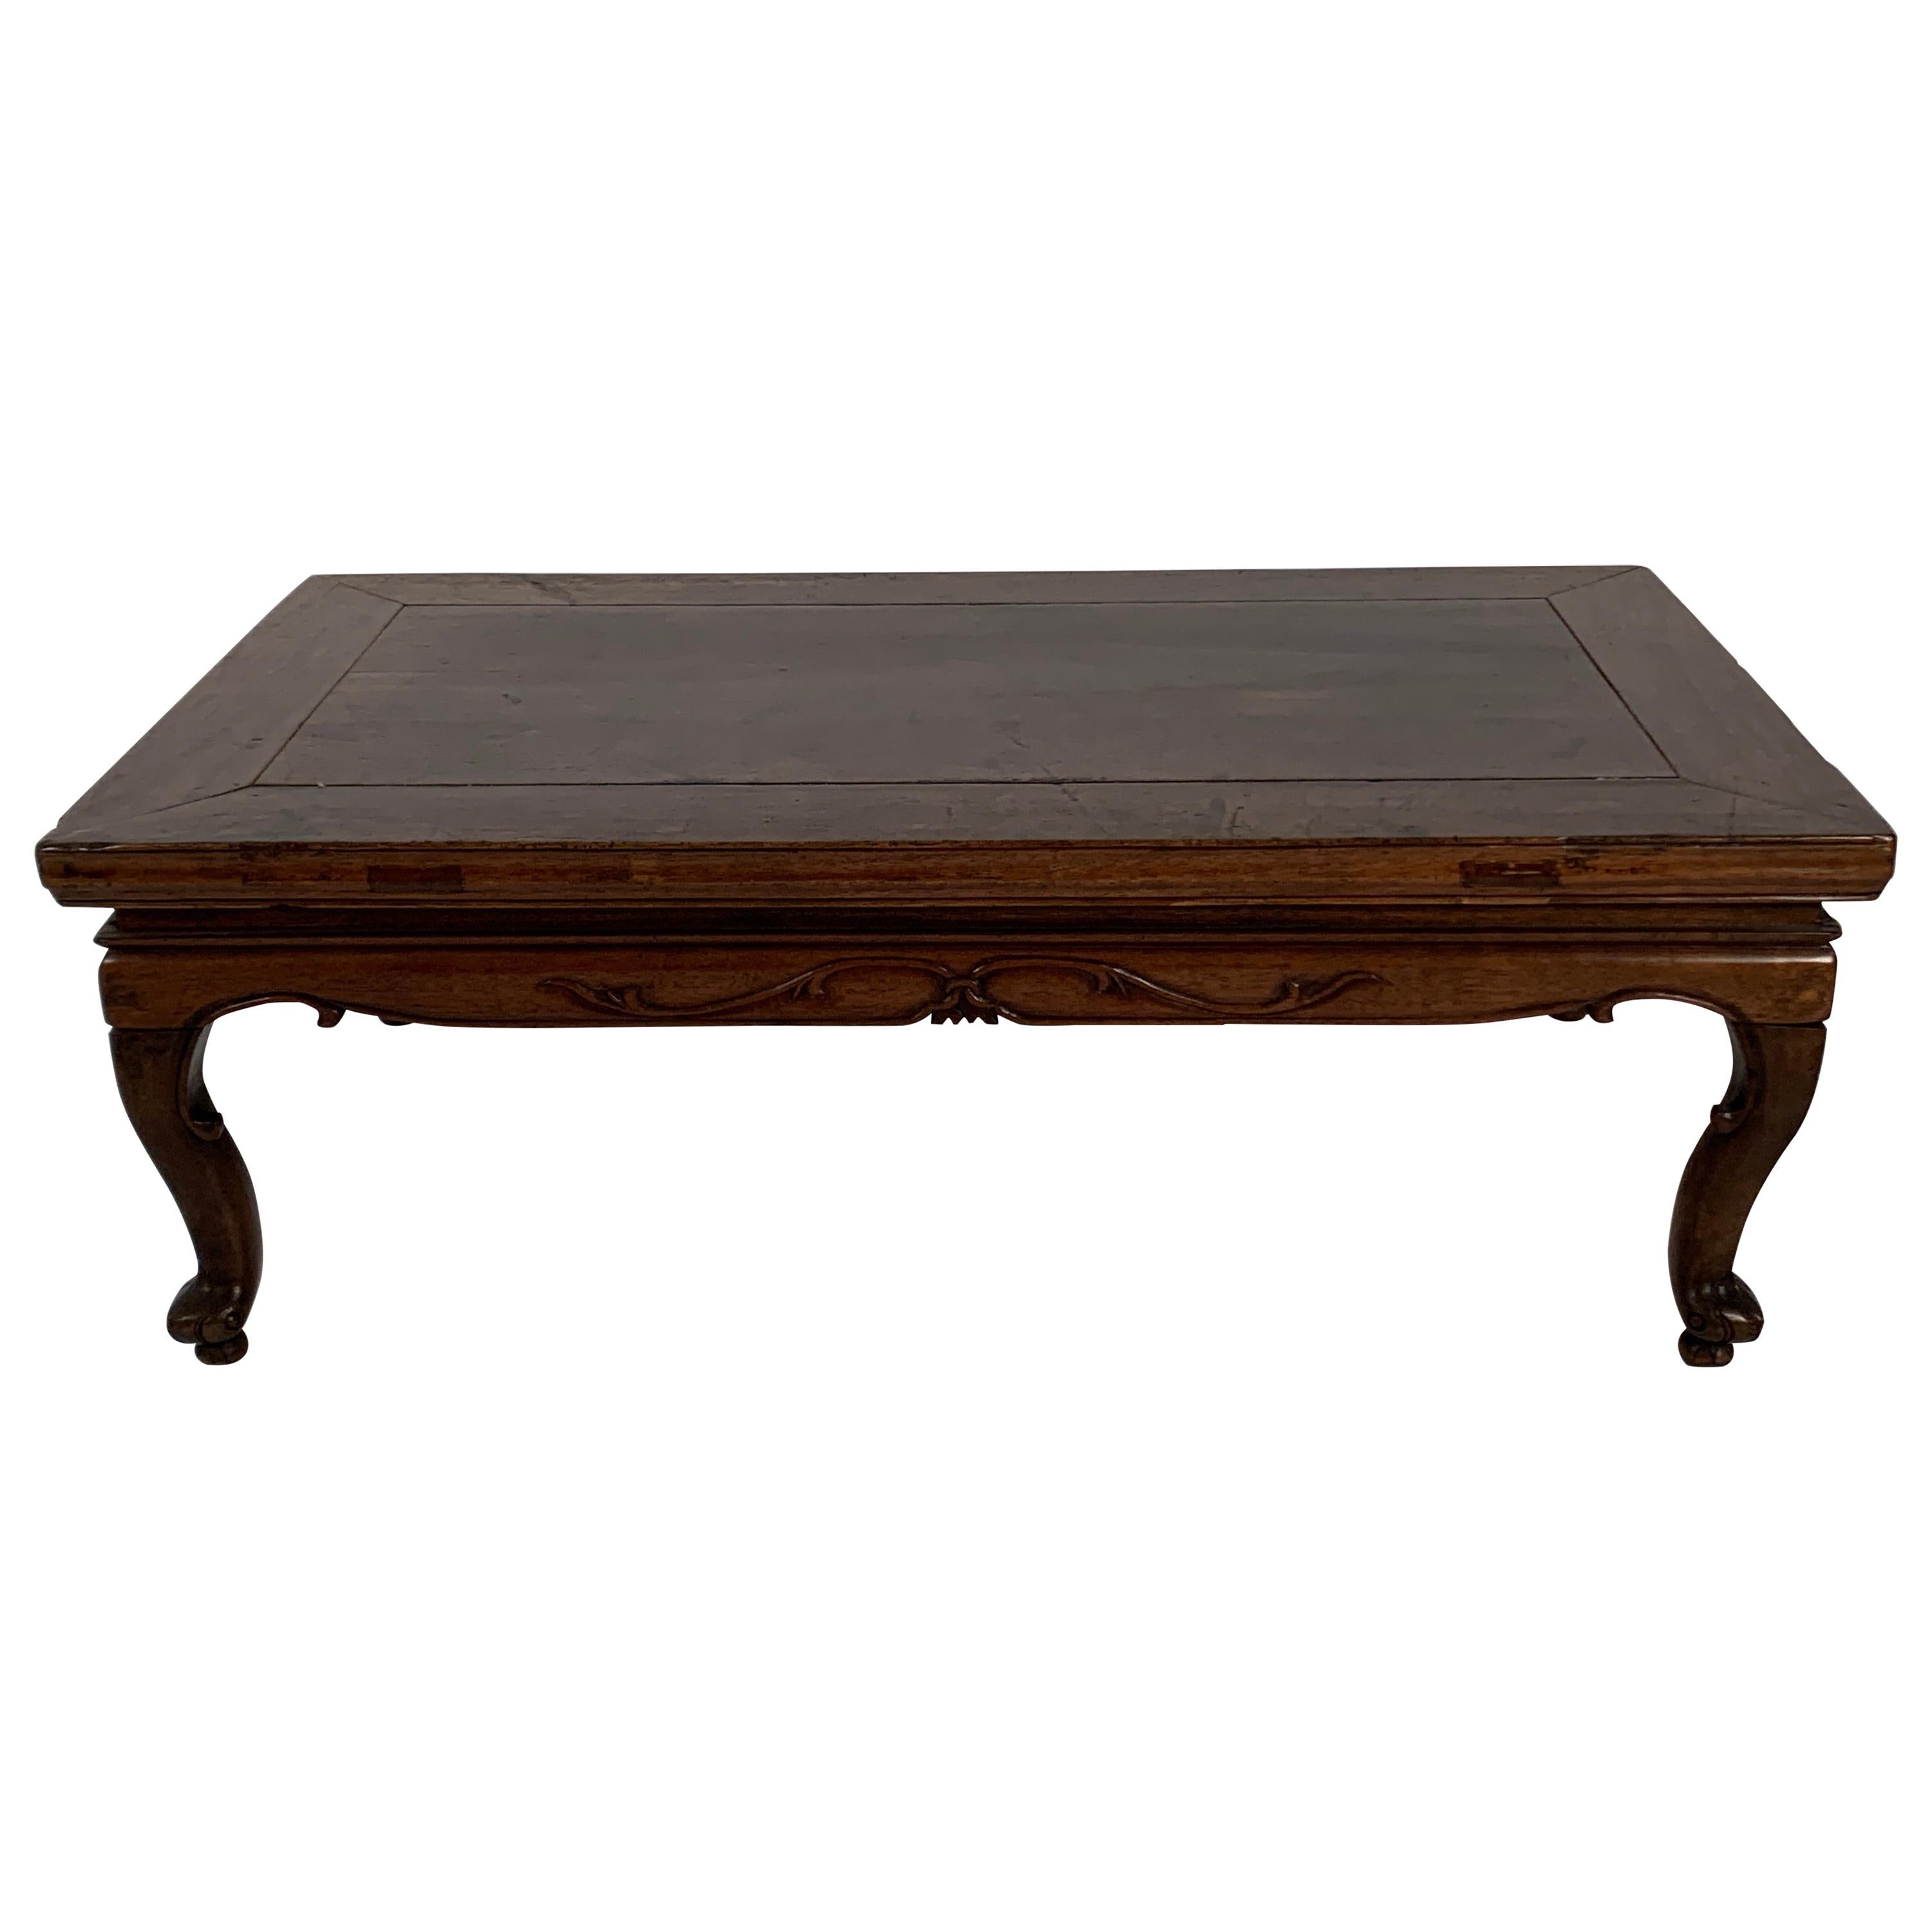 Chinese Early Qing Dynasty Walnut Folding Table, 17th-18th Century, China For Sale